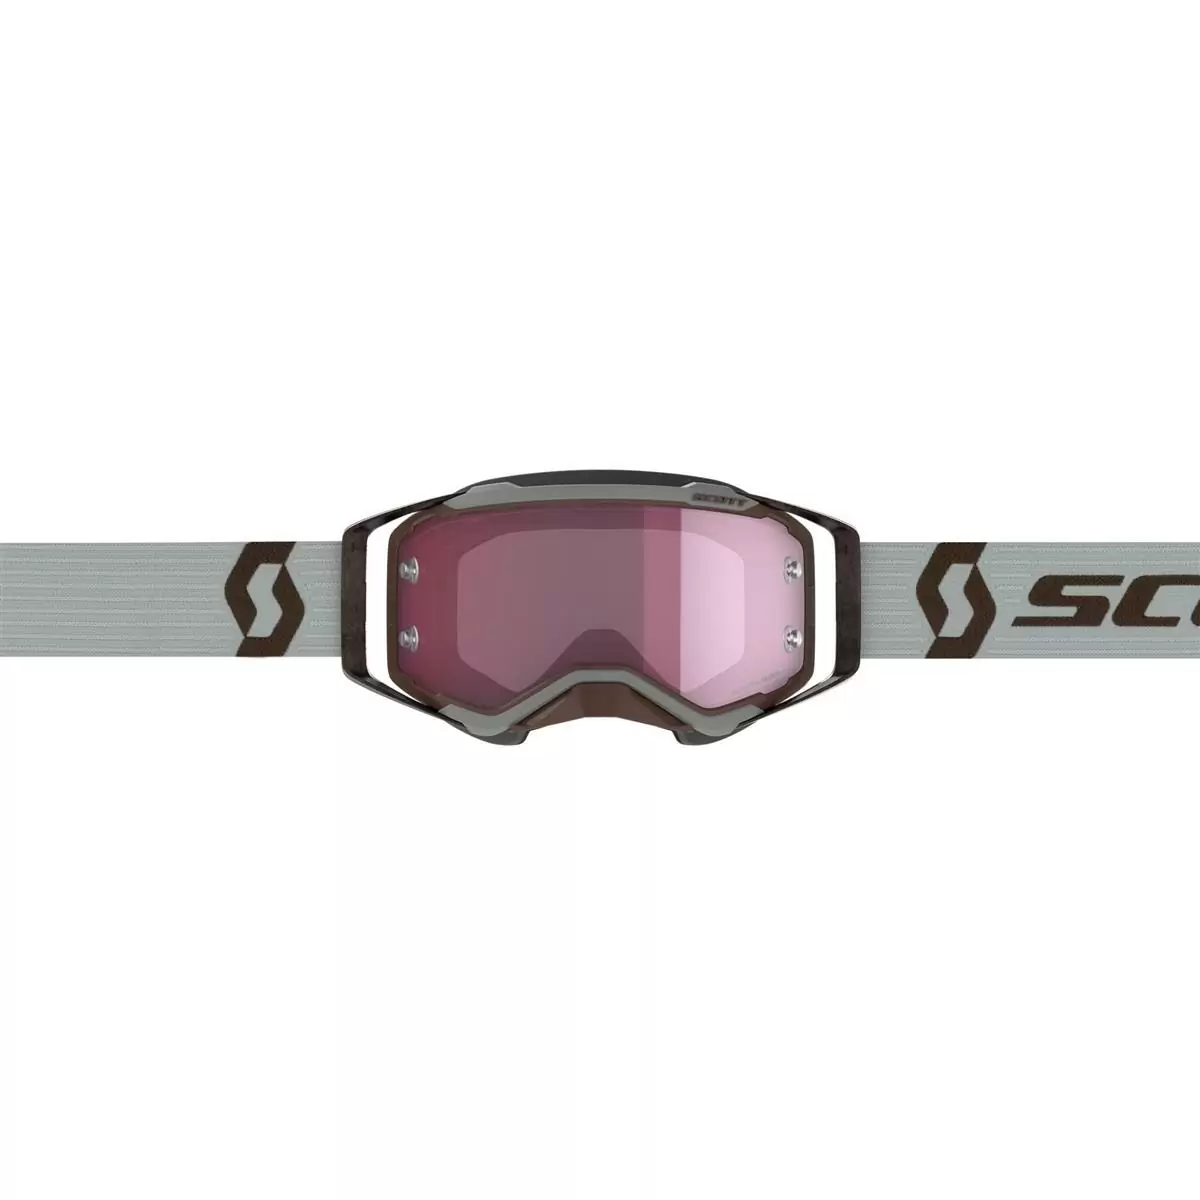 Prospect Goggle Grey/Brown Rose Works Linse #1